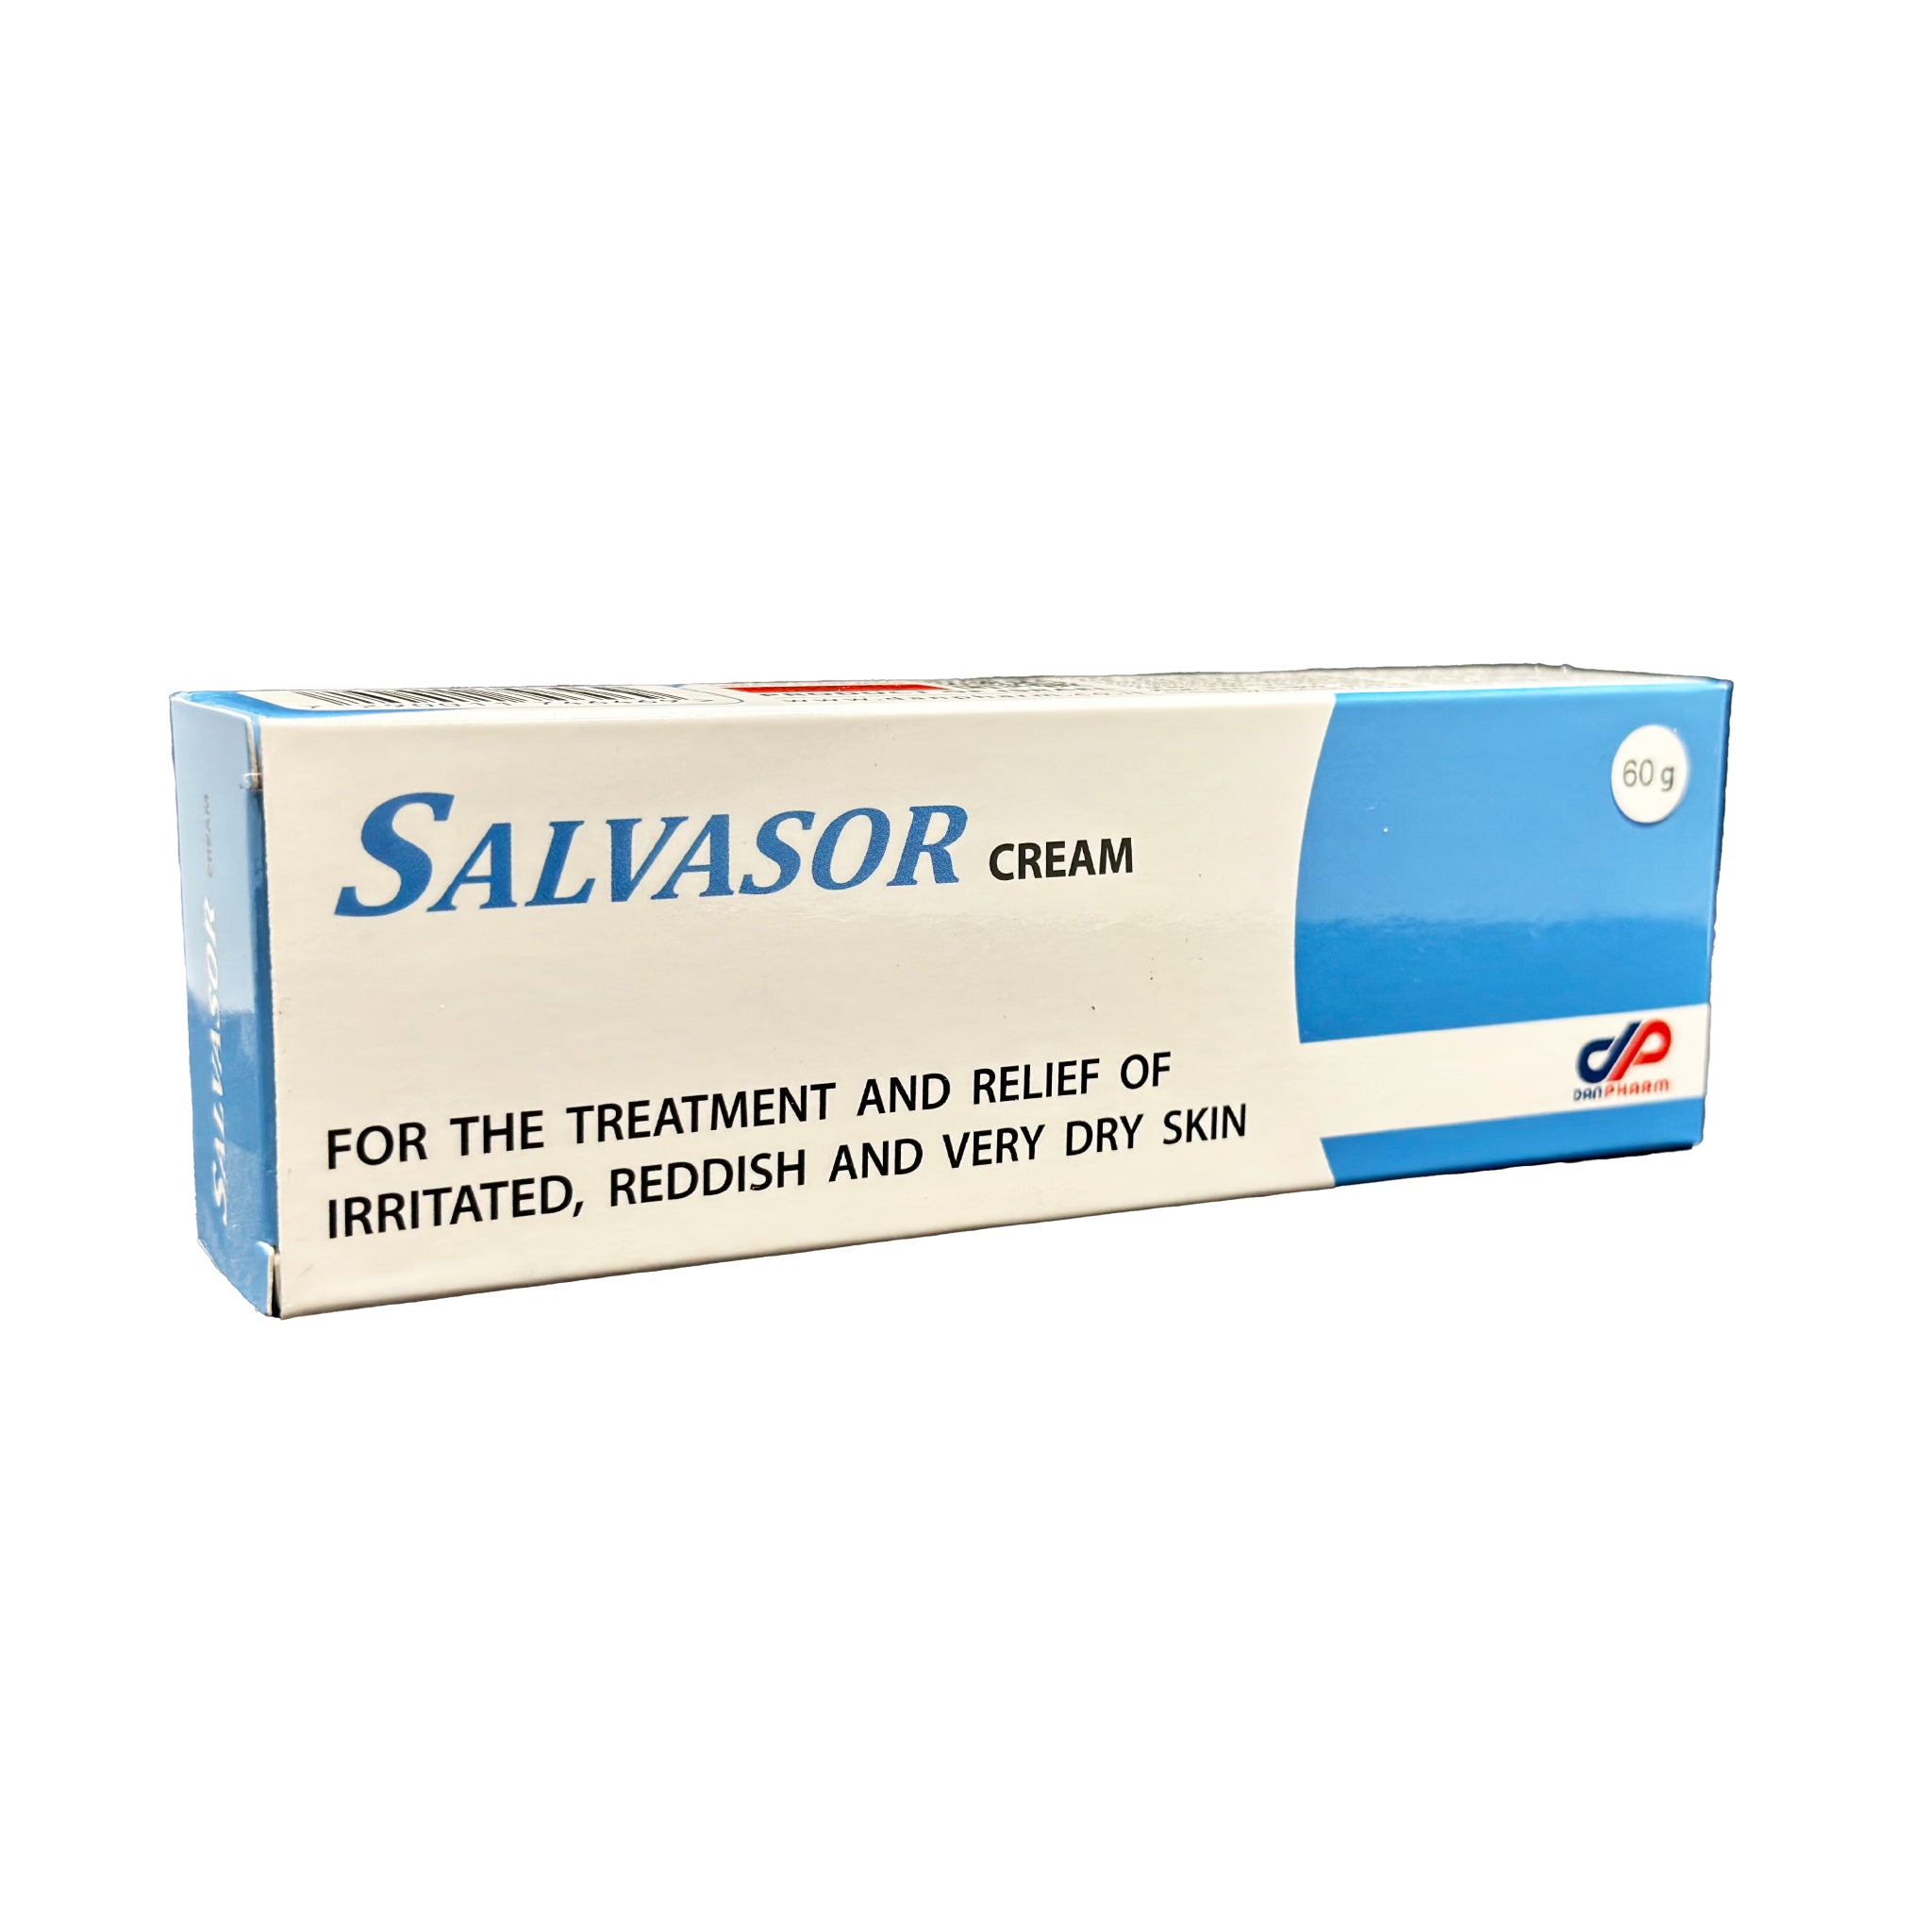 Salvasor Skin Treatment Cream - Eczema Psoriasis Cream for Dry, Itchy, Rough and Irritated Skin - Reduces Appearance of Skin Redness